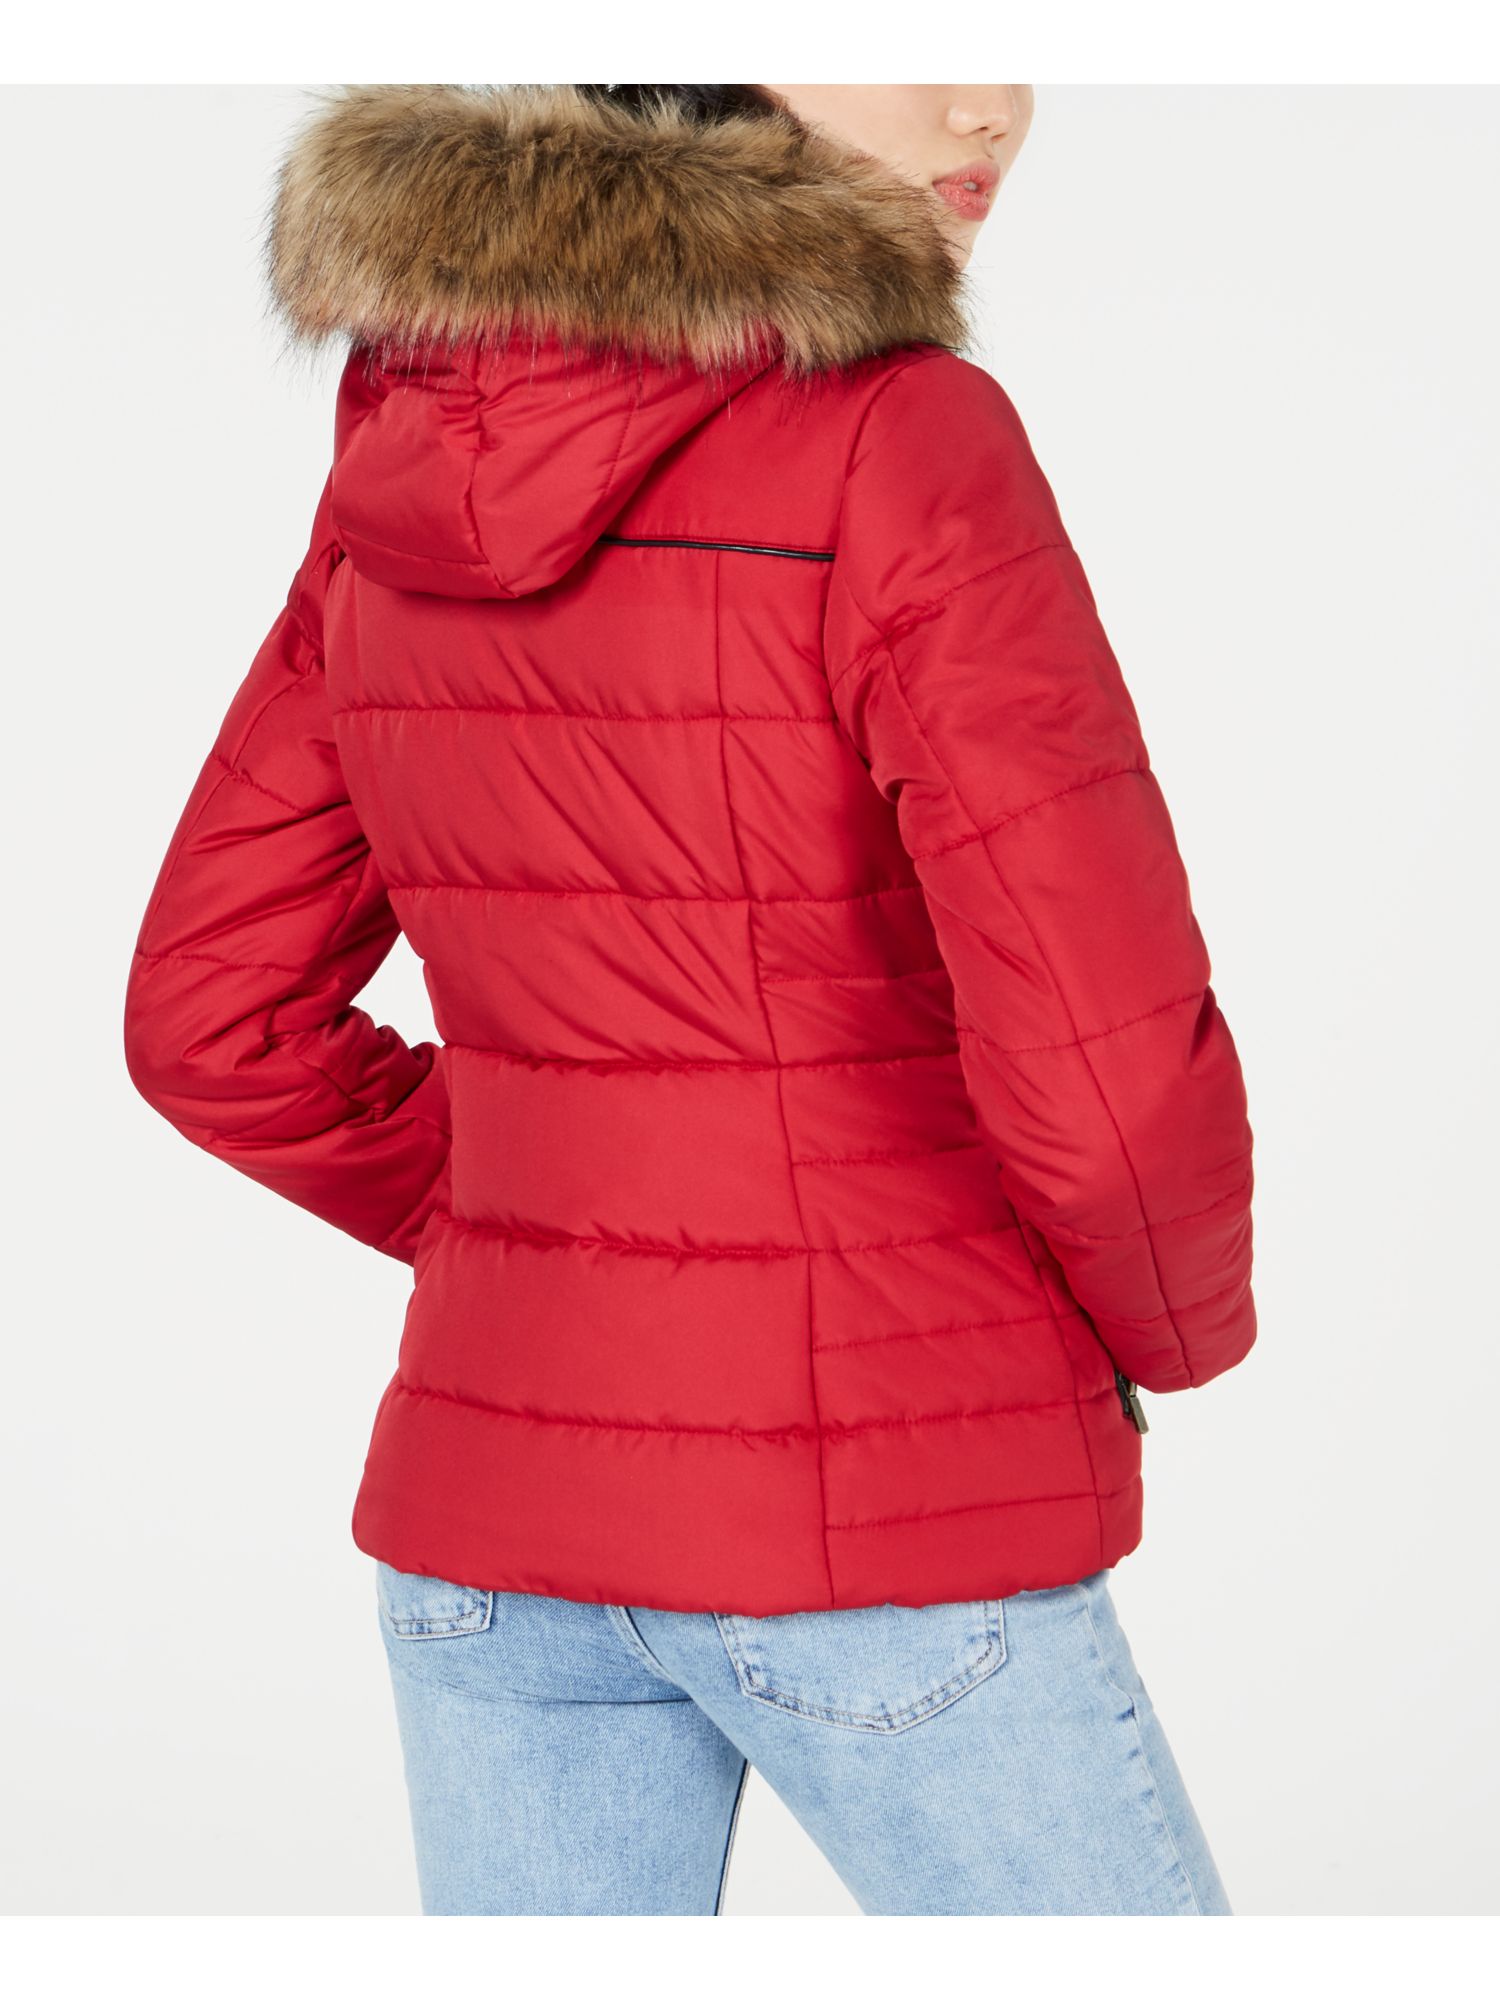 CELEBRITY PINK Womens Red Zippered Faux Fur Hood Lined Puffer Winter Jacket Coat Juniors M - image 2 of 2